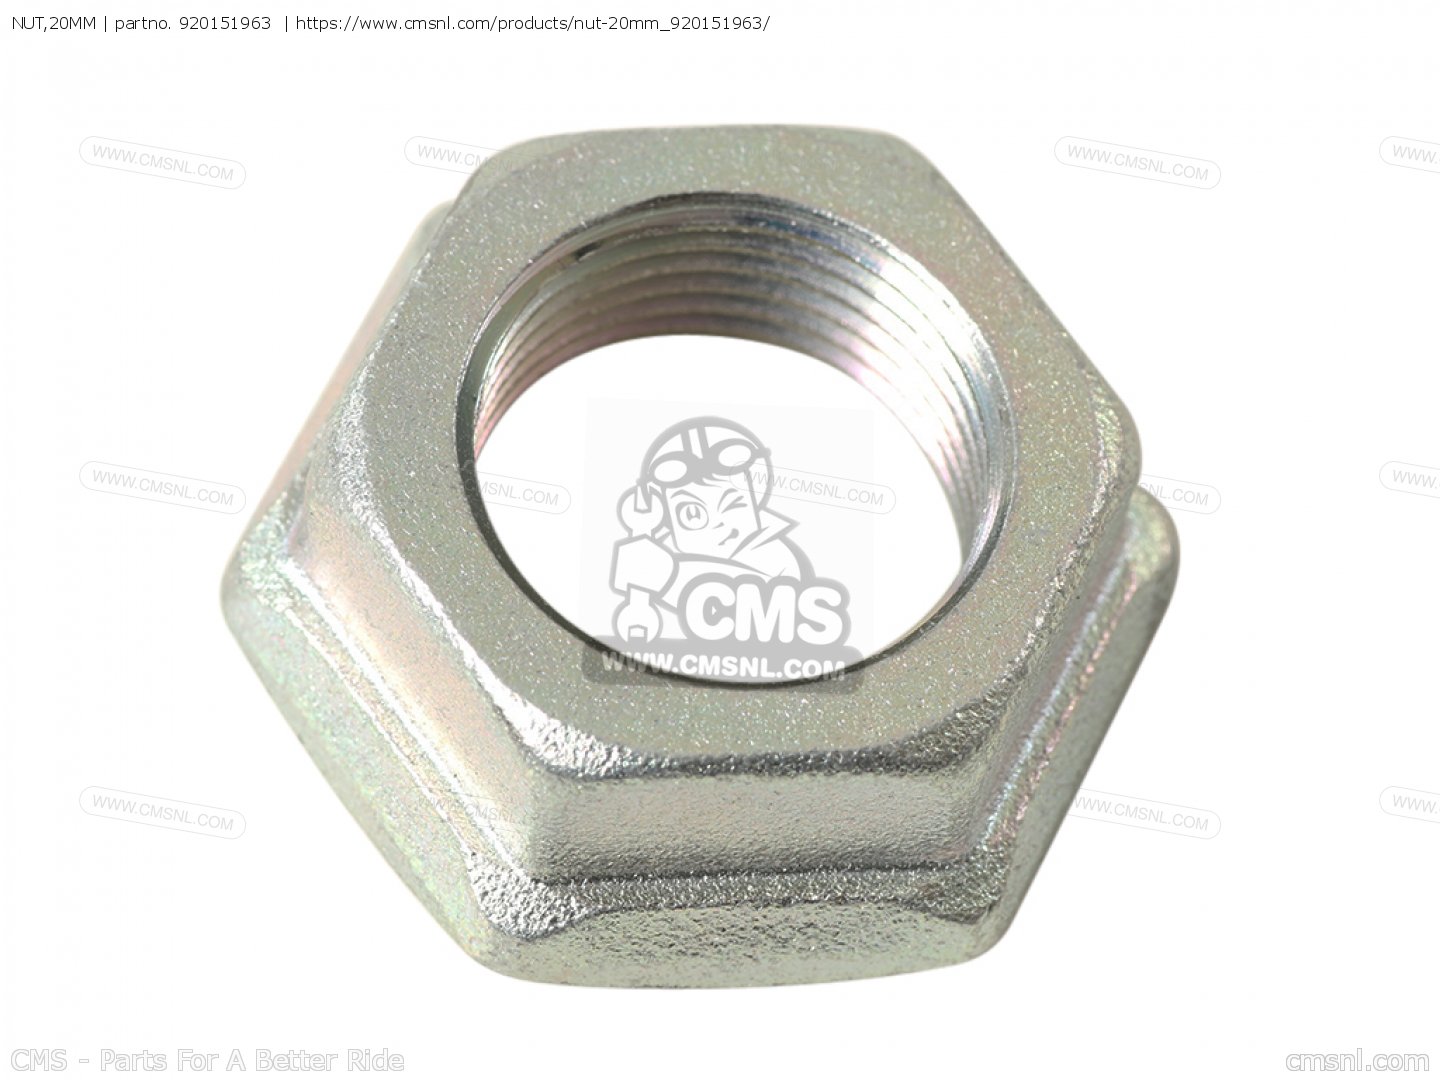 NUT,20MM for ZX1000JFFA NINJA ZX-10R 2015 EUROPE,MIDDLE EAST 